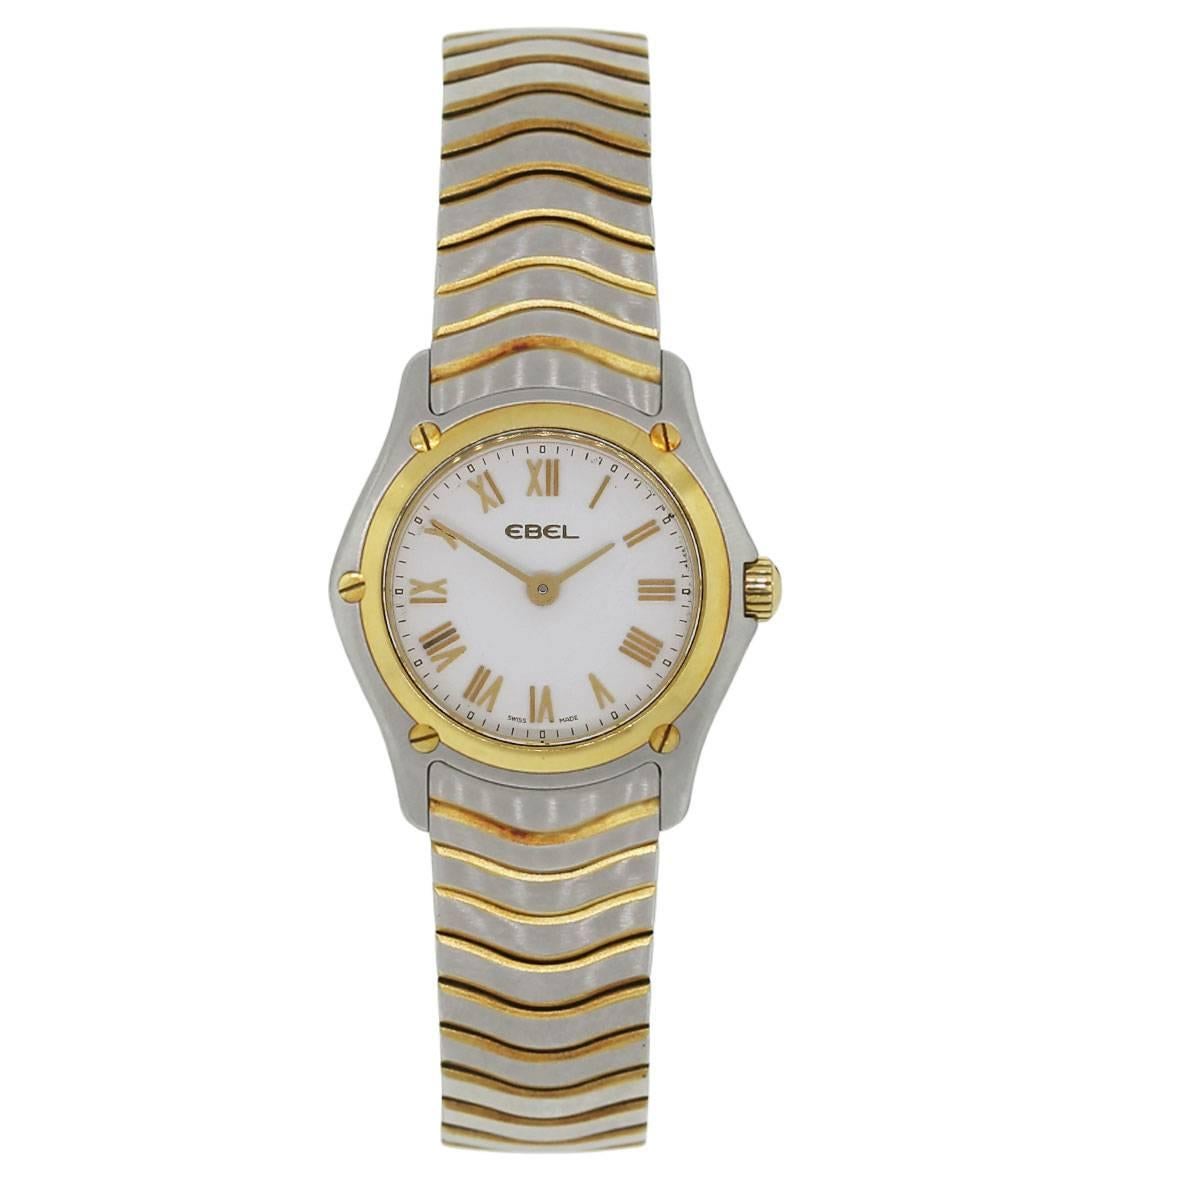 Brand: Ebel
Style: Wave
MPN: E-1003F11.1
Case Material: Stainless steel
Case Diameter: 25mm
Bezel: 18k yellow gold
Dial: White roman dial with gold hands
Bracelet: Two tone stainless steel and gold band
Crystal: Sapphire
Size: Will fit a 6″